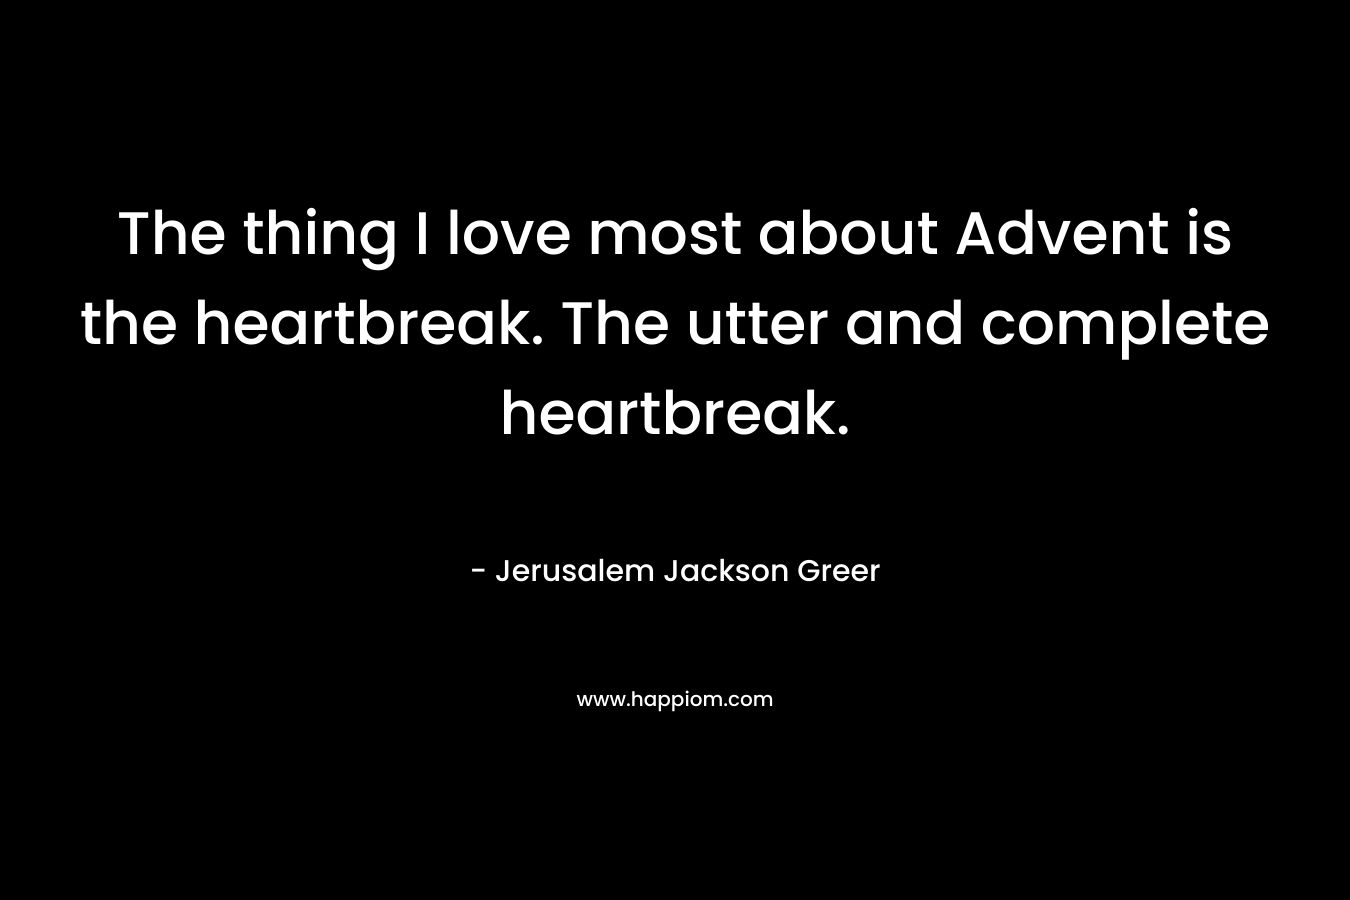 The thing I love most about Advent is the heartbreak. The utter and complete heartbreak. – Jerusalem Jackson Greer